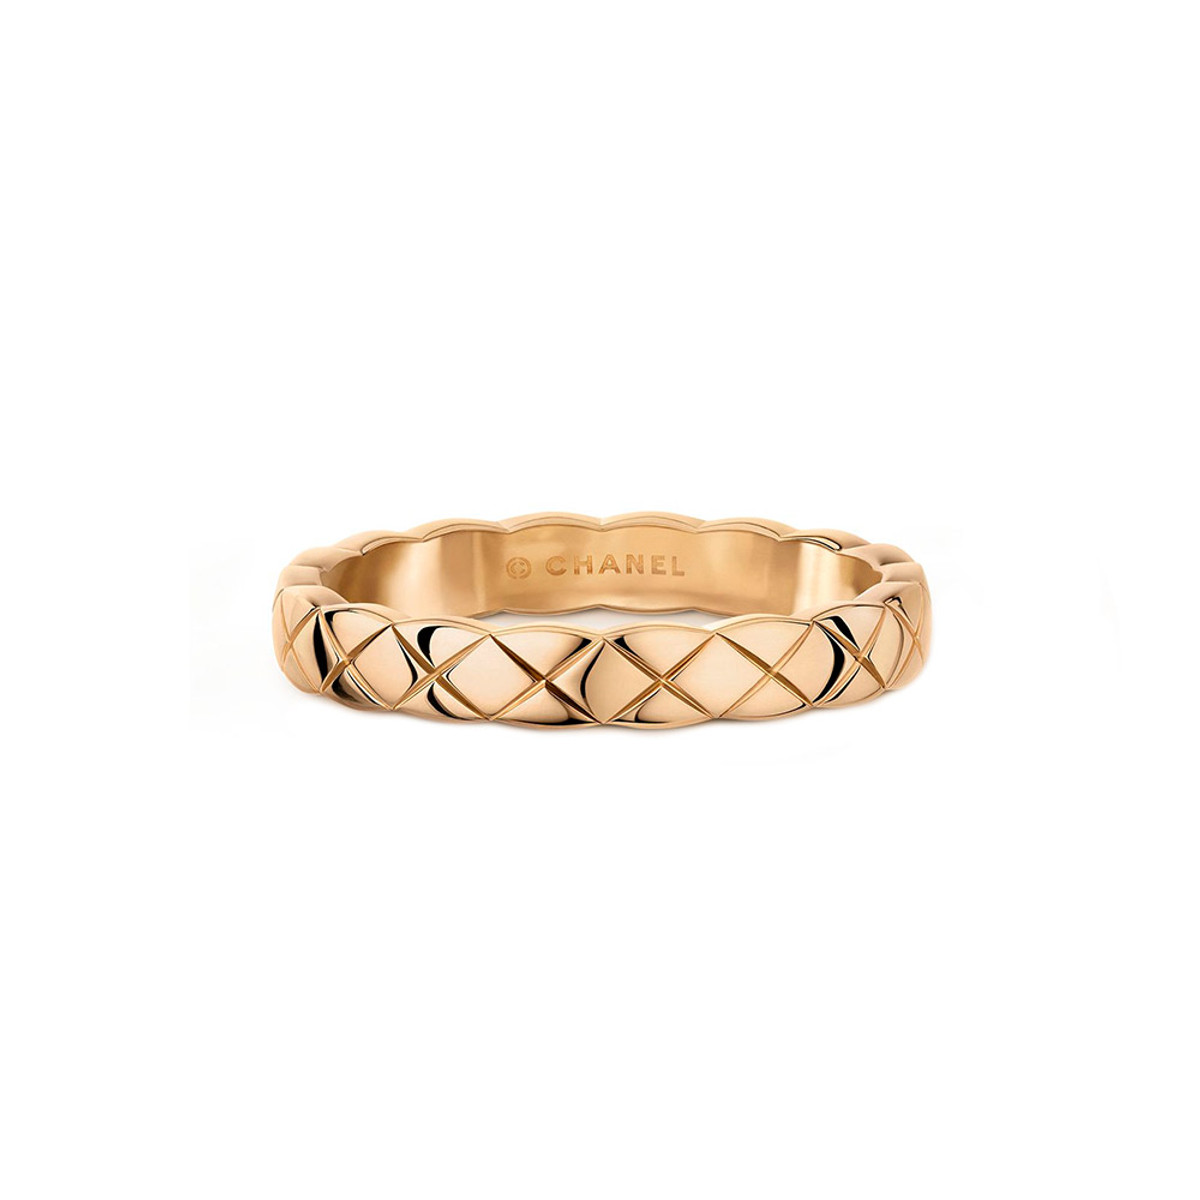 CHANEL COCO CRUSH RING-22510 Product Image